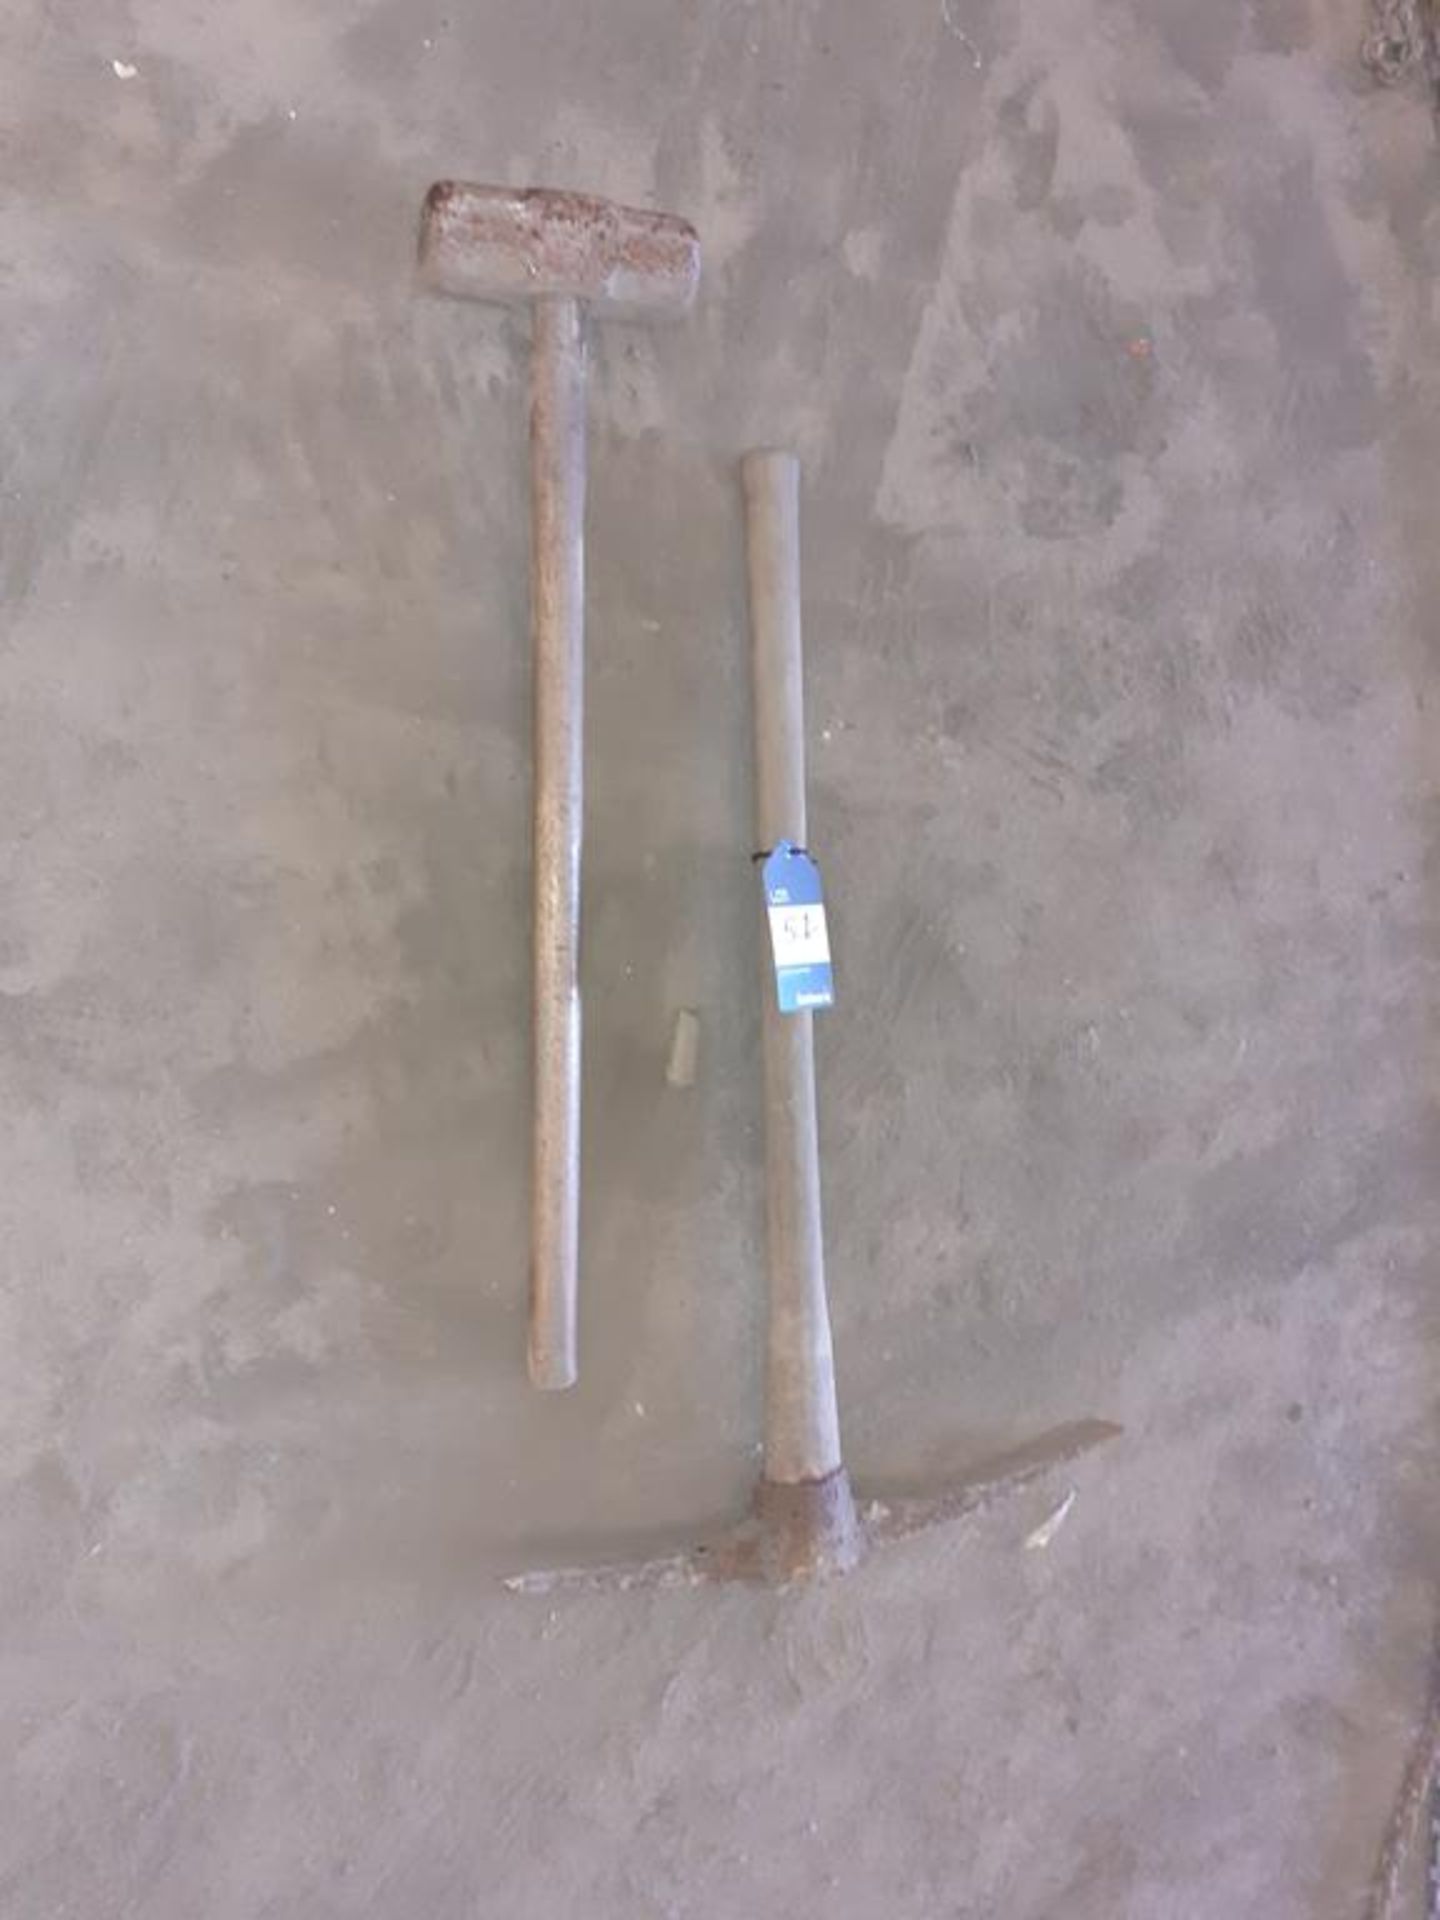 Sledge hammer and pick axe. This lot is Buyer to Remove.